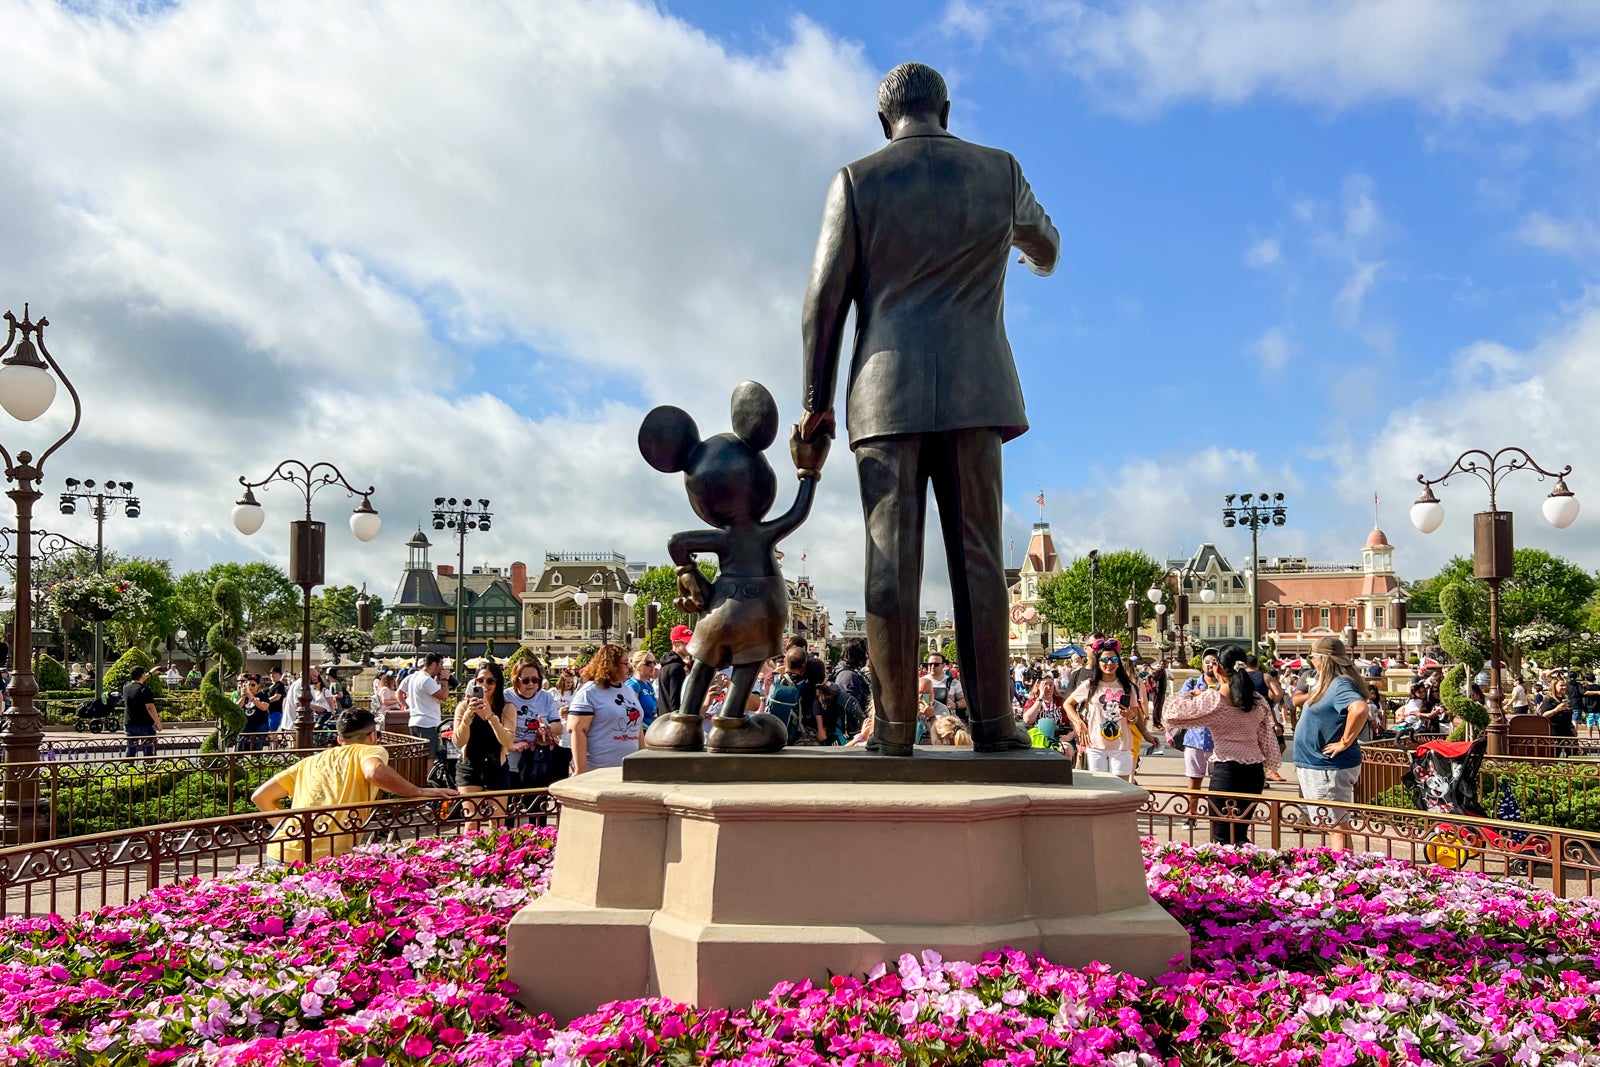 Disney World Vacation: Average Cost for 2 Adults - NerdWallet